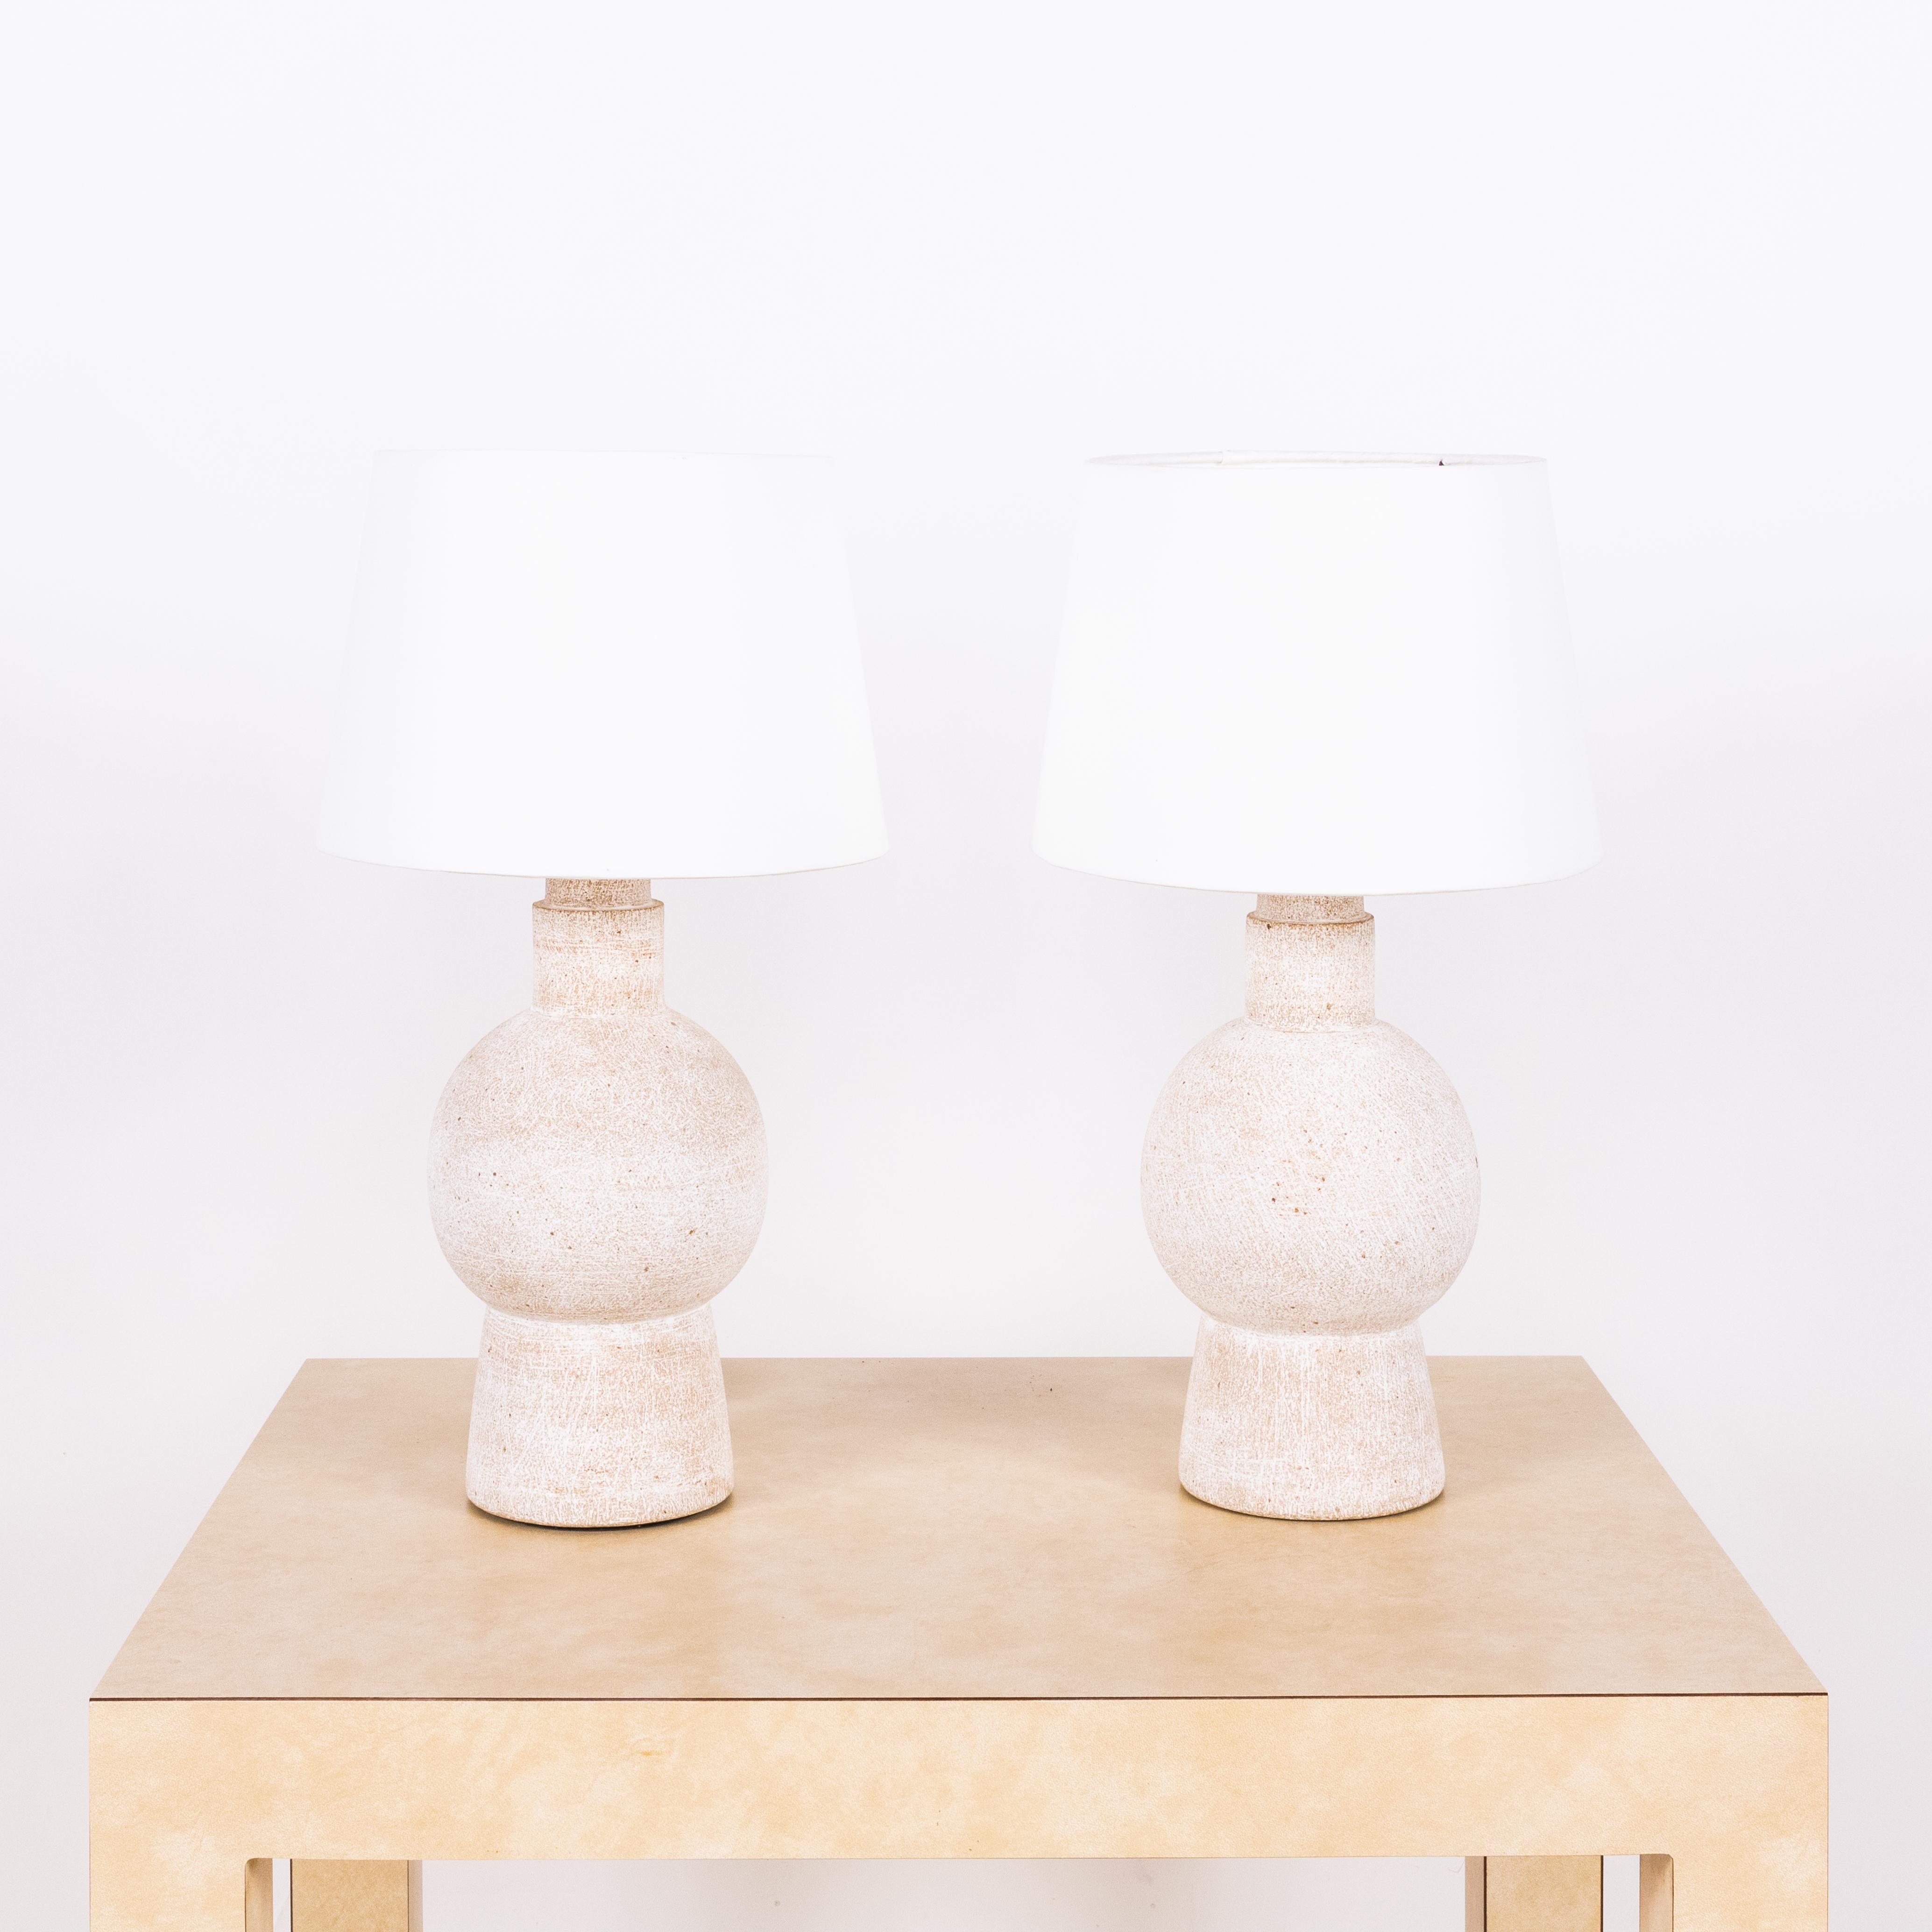 Pair of white 'Bilboquet' stoneware lamps by Design Frères.

Dimensions listed (10 in. diameter x 18 in. tall) are the overall dimensions of the lamps plus the shades (as pictured). The lamp bases are 11 in. tall and the shades are 7 in. tall.